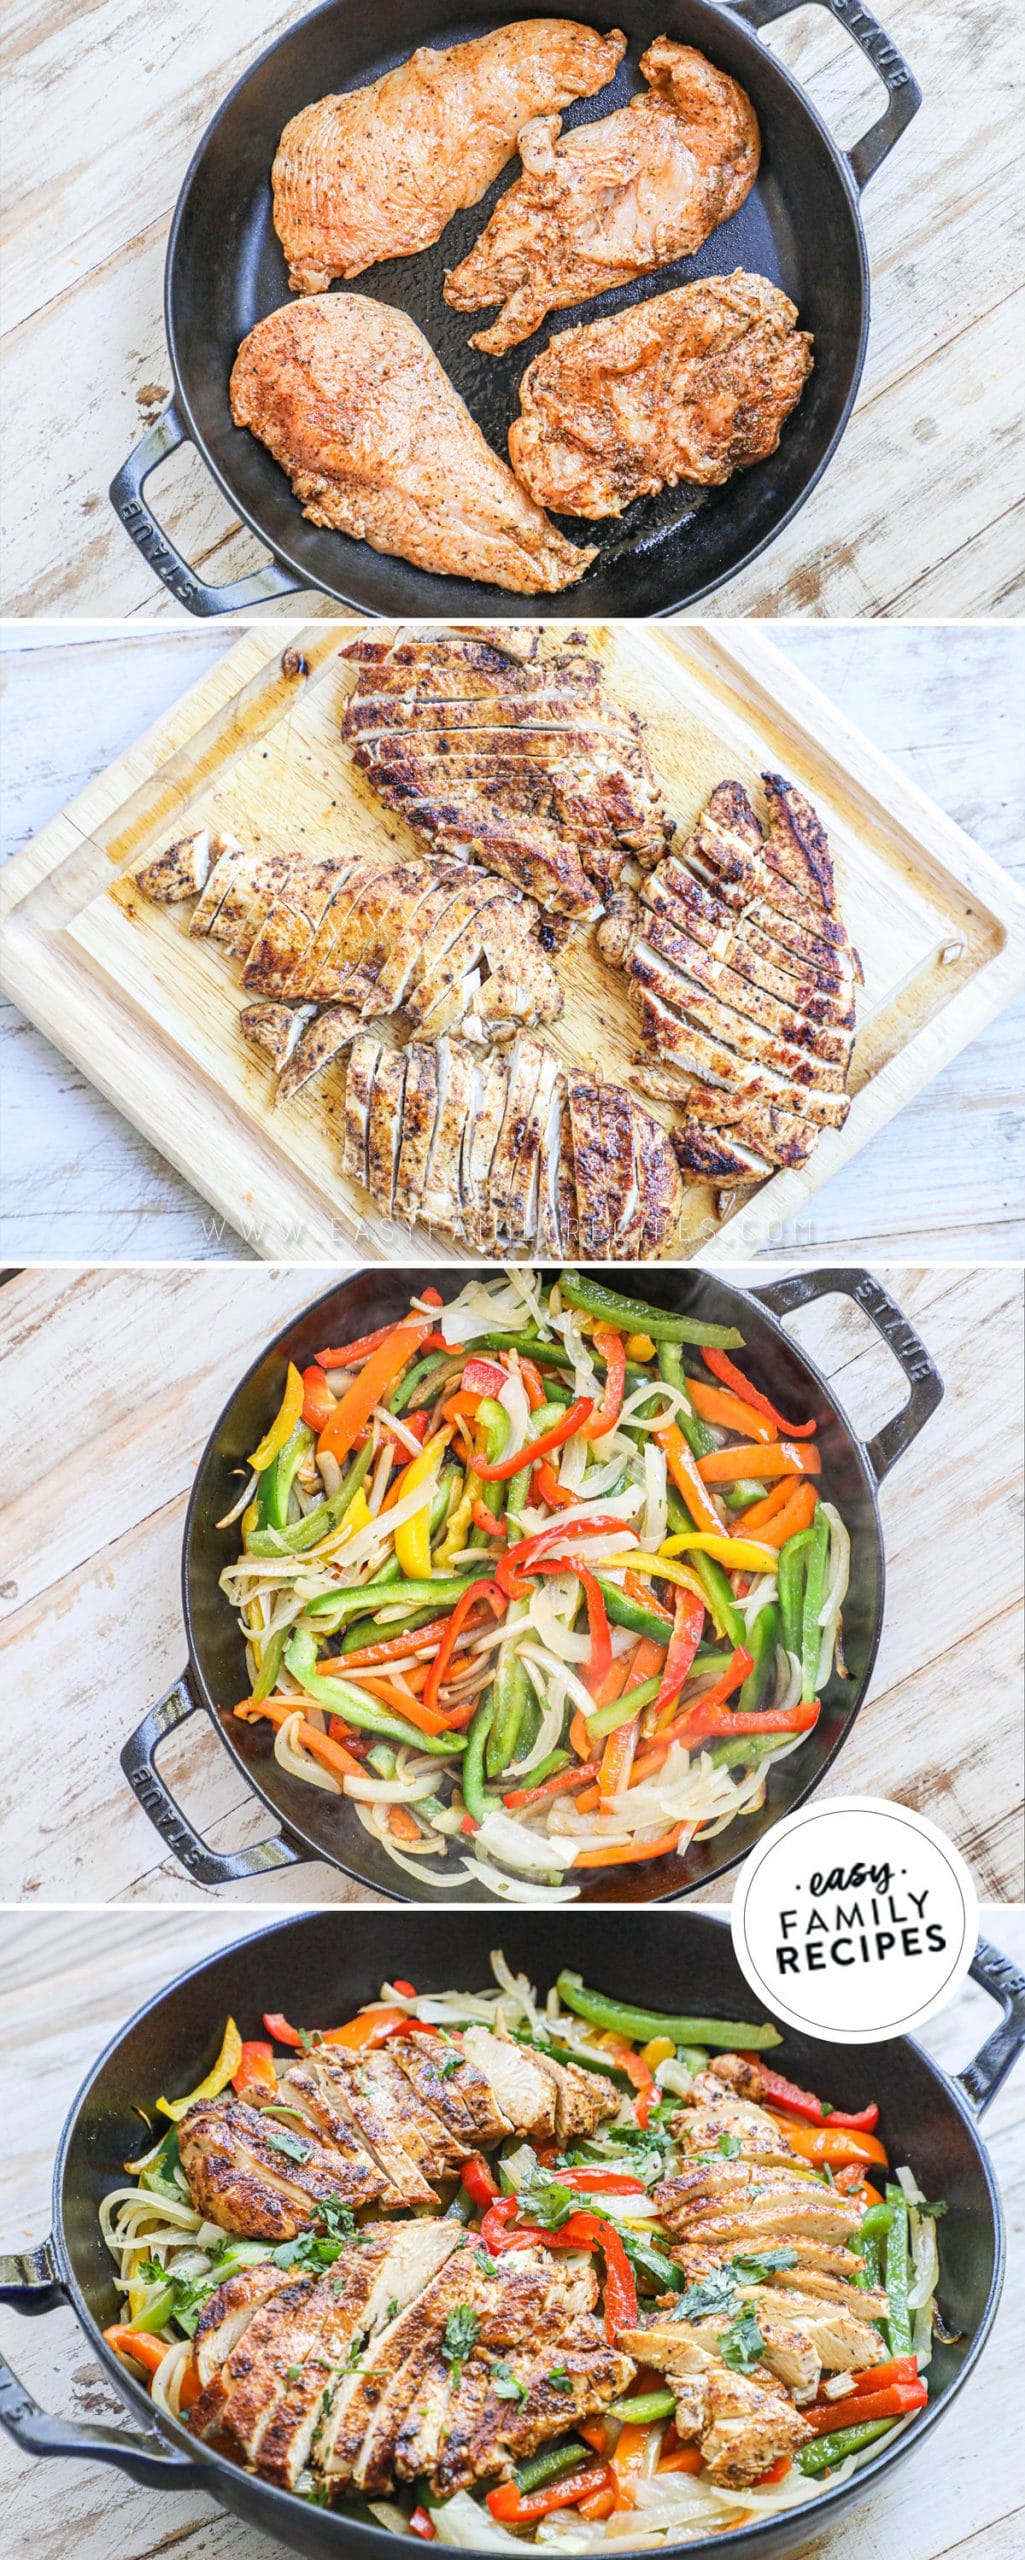 Process photos for how to make chicken fajitas in a skillet 1. Cook marinated chicken in cast iron skillet 2. Chop chicken 3. Cook onions and peppers 4. combine onions and peppers with cooked chicken